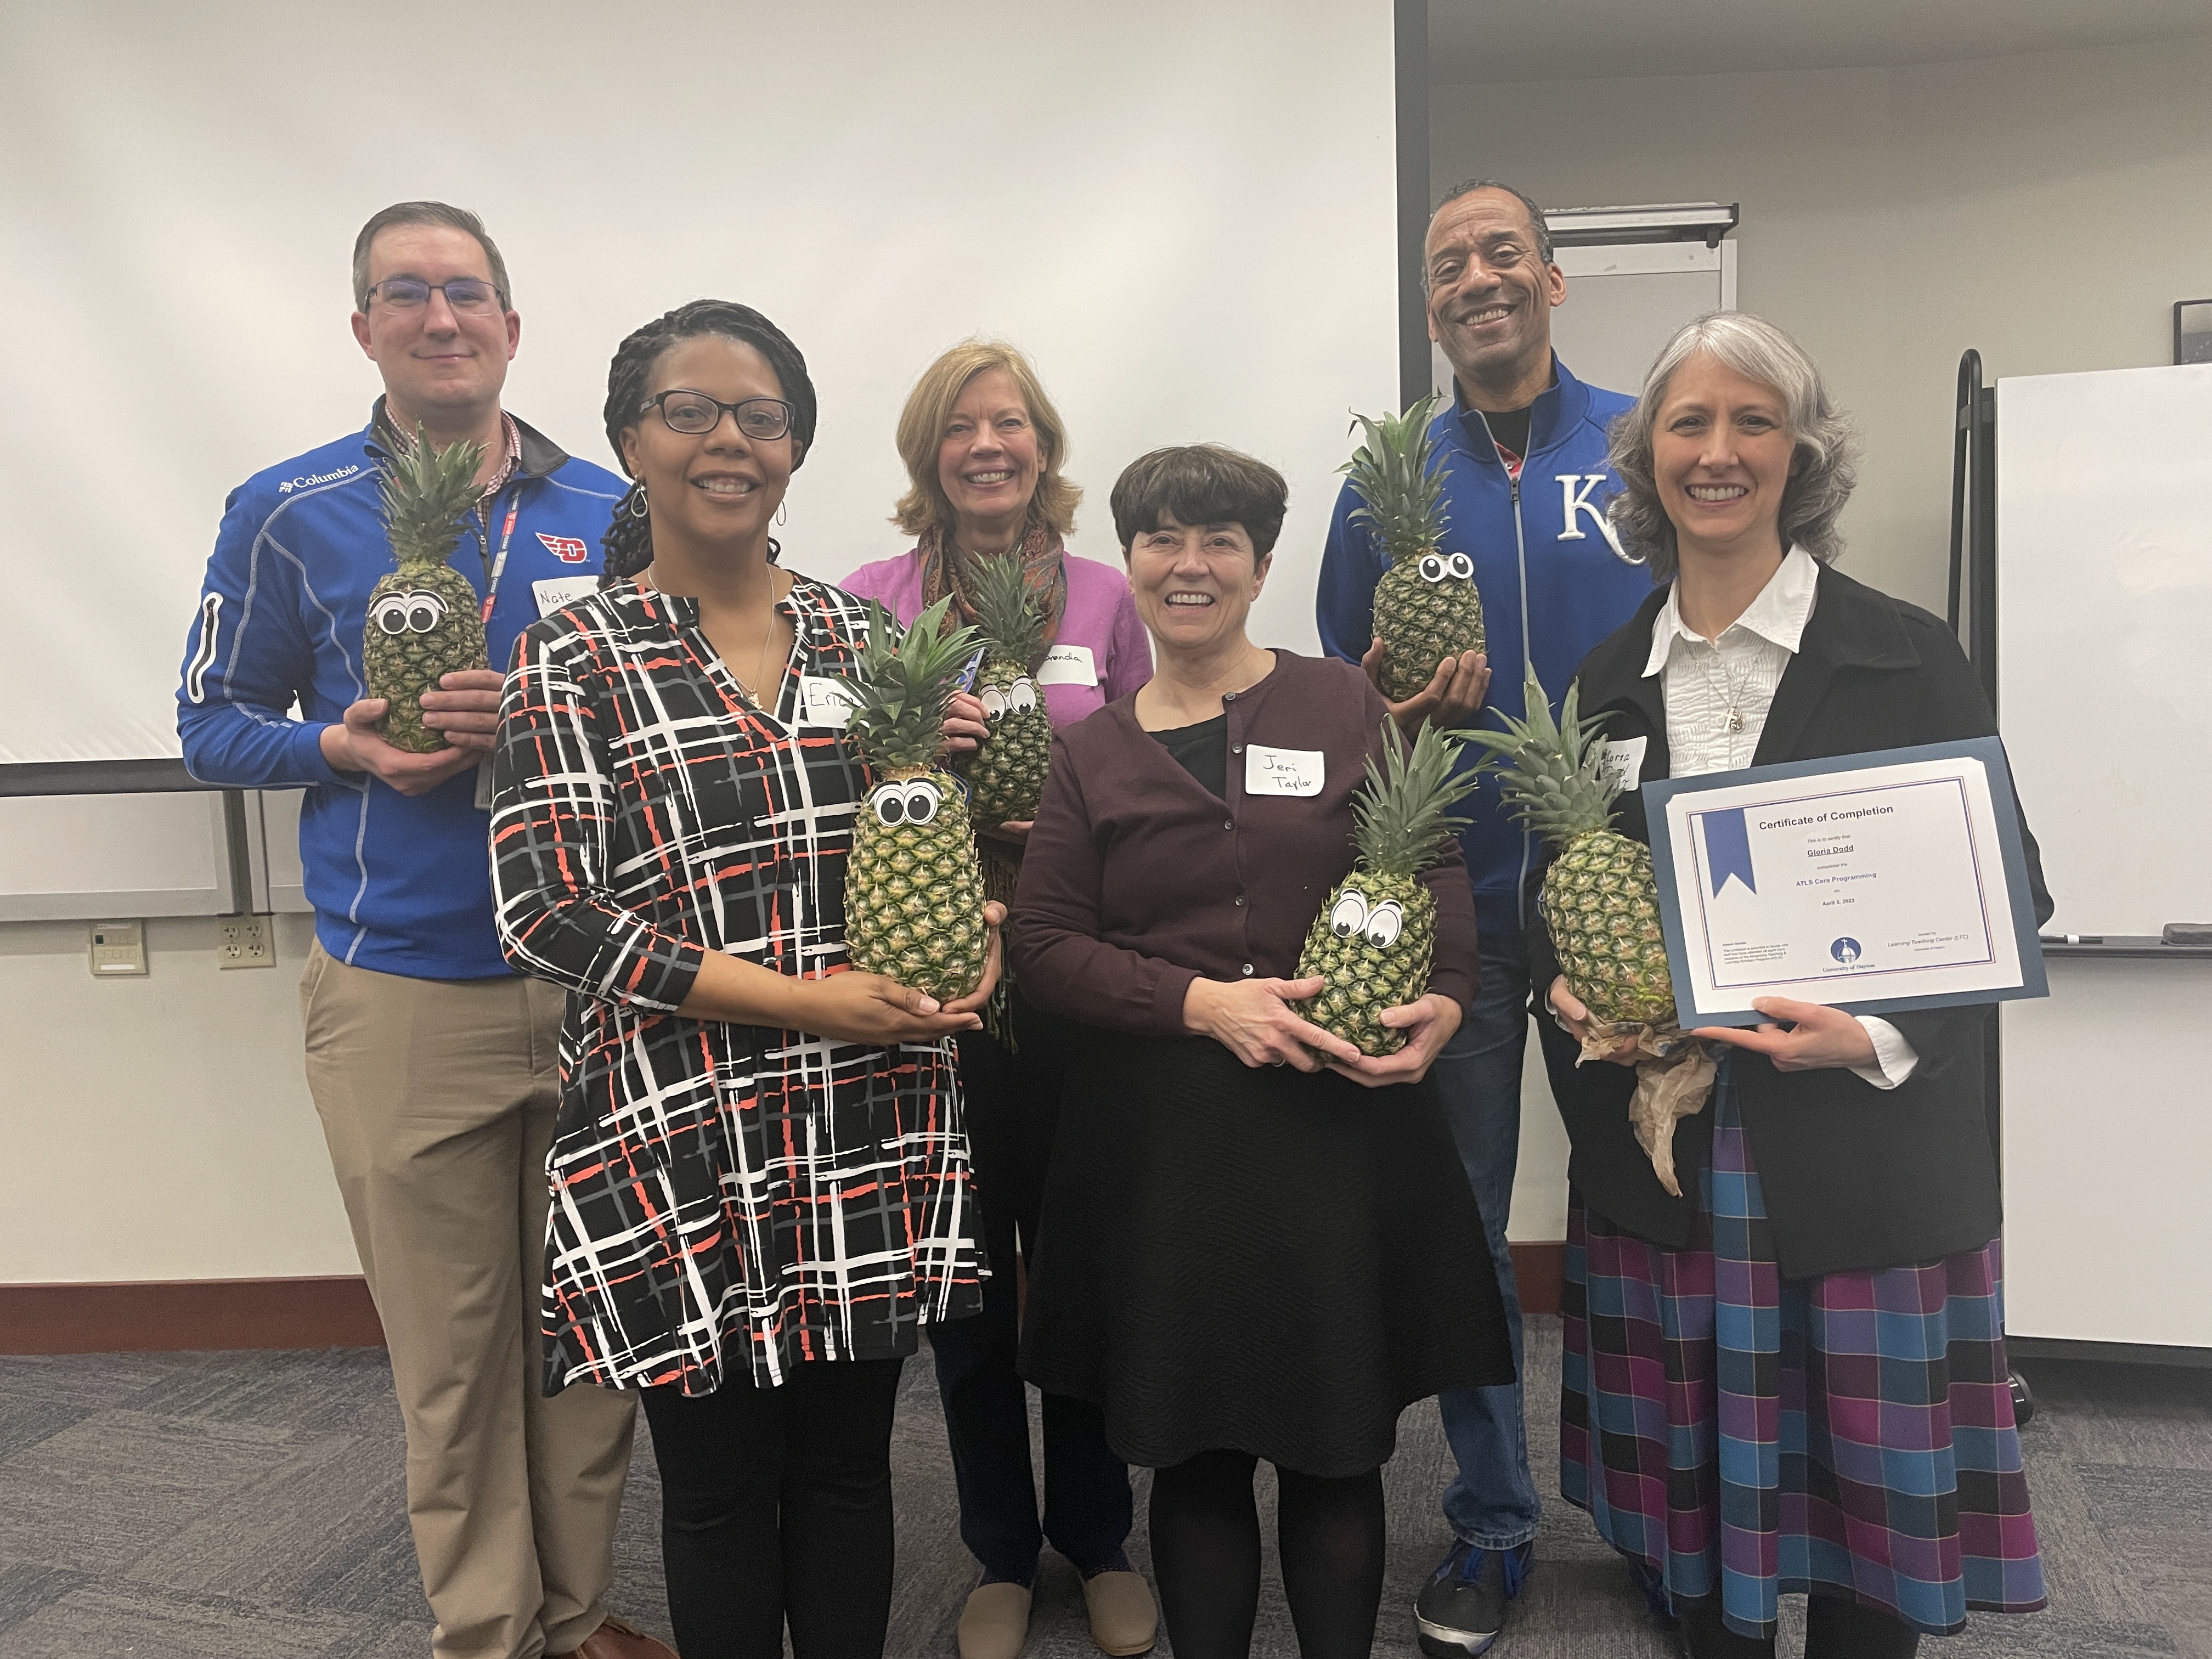 Faculty members Nathan Henderson, Erica Hunter, Brenda Lecklider, Jeri Taylor, Verb Washington, and Gloria Dodd pose with pineapples to signify their graduation from ATLS.